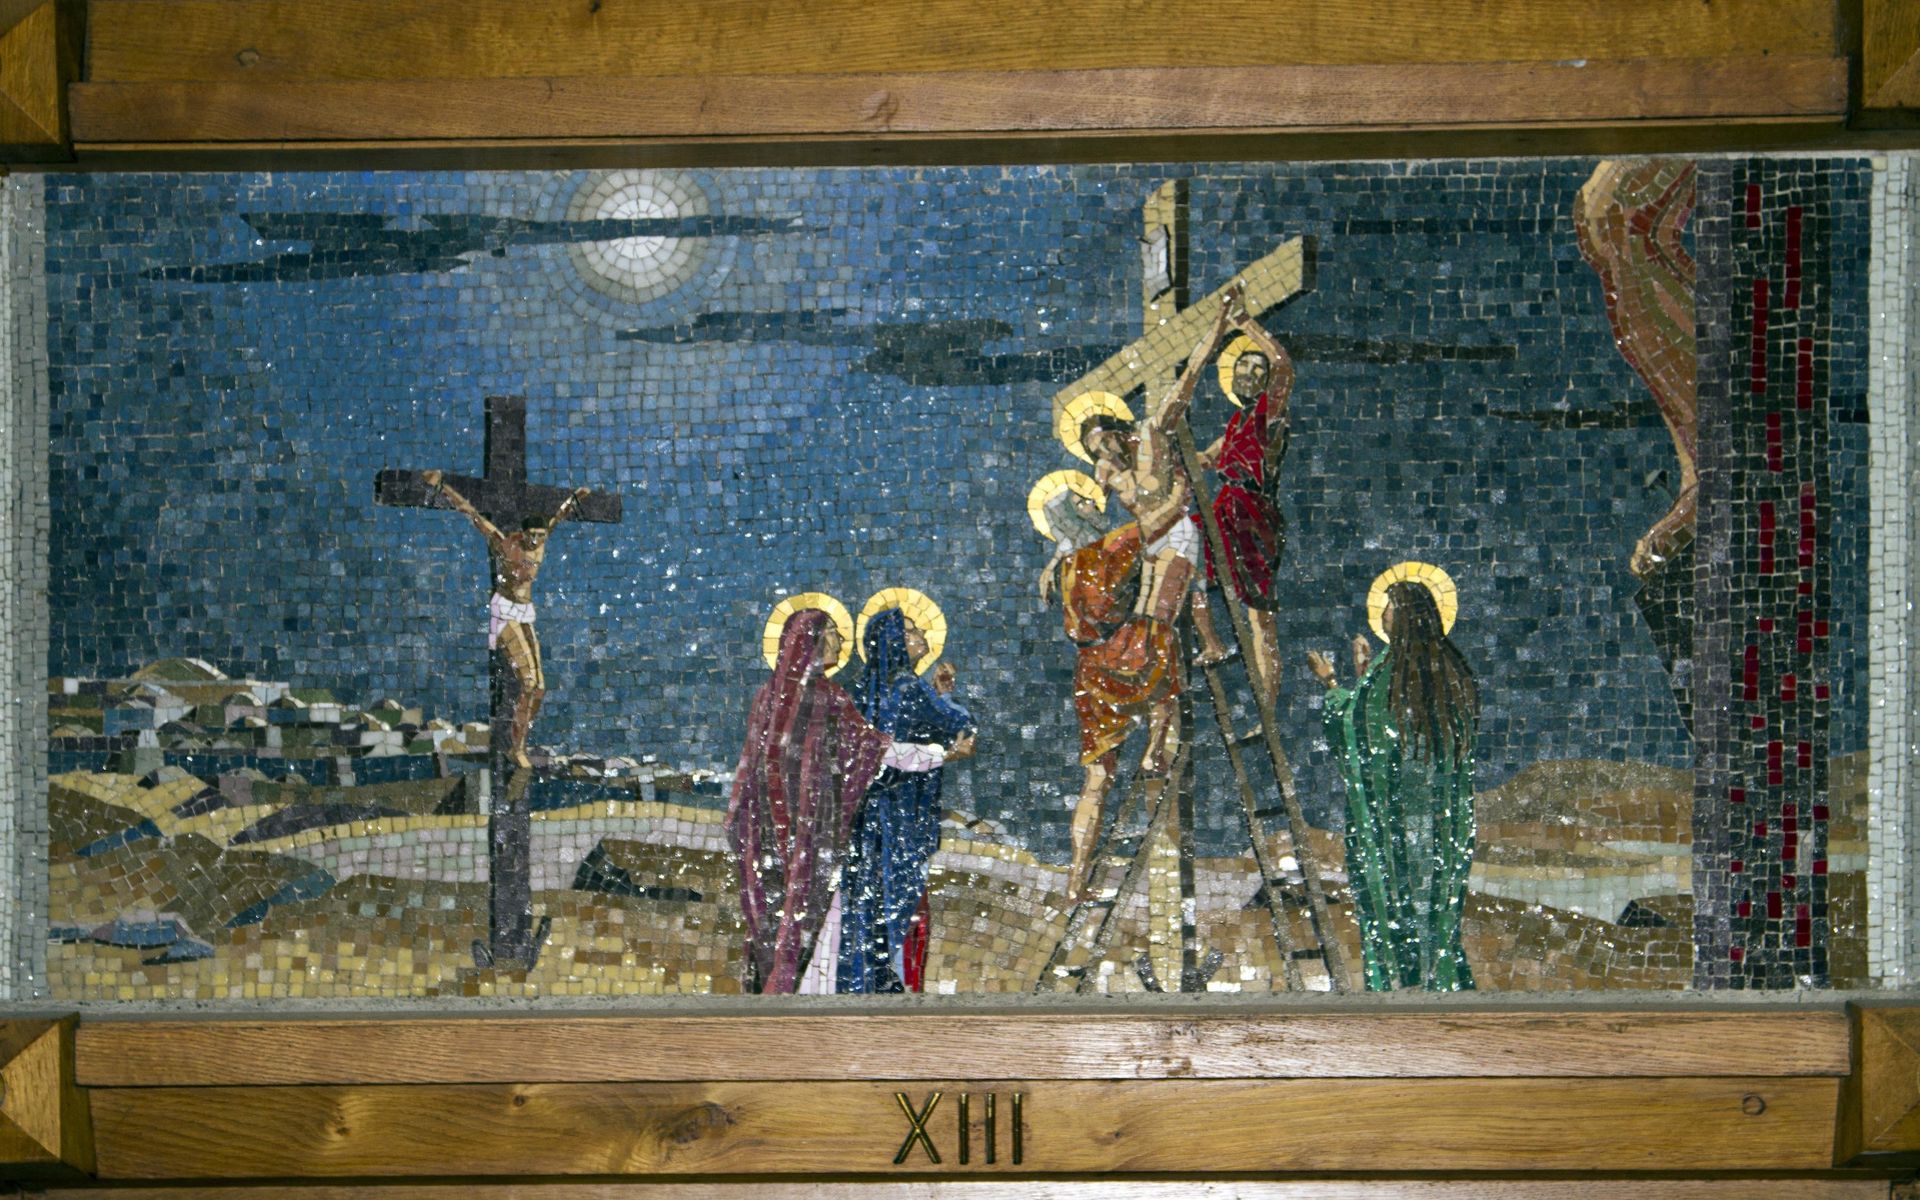 A mosaic painting of jesus being nailed to a cross.